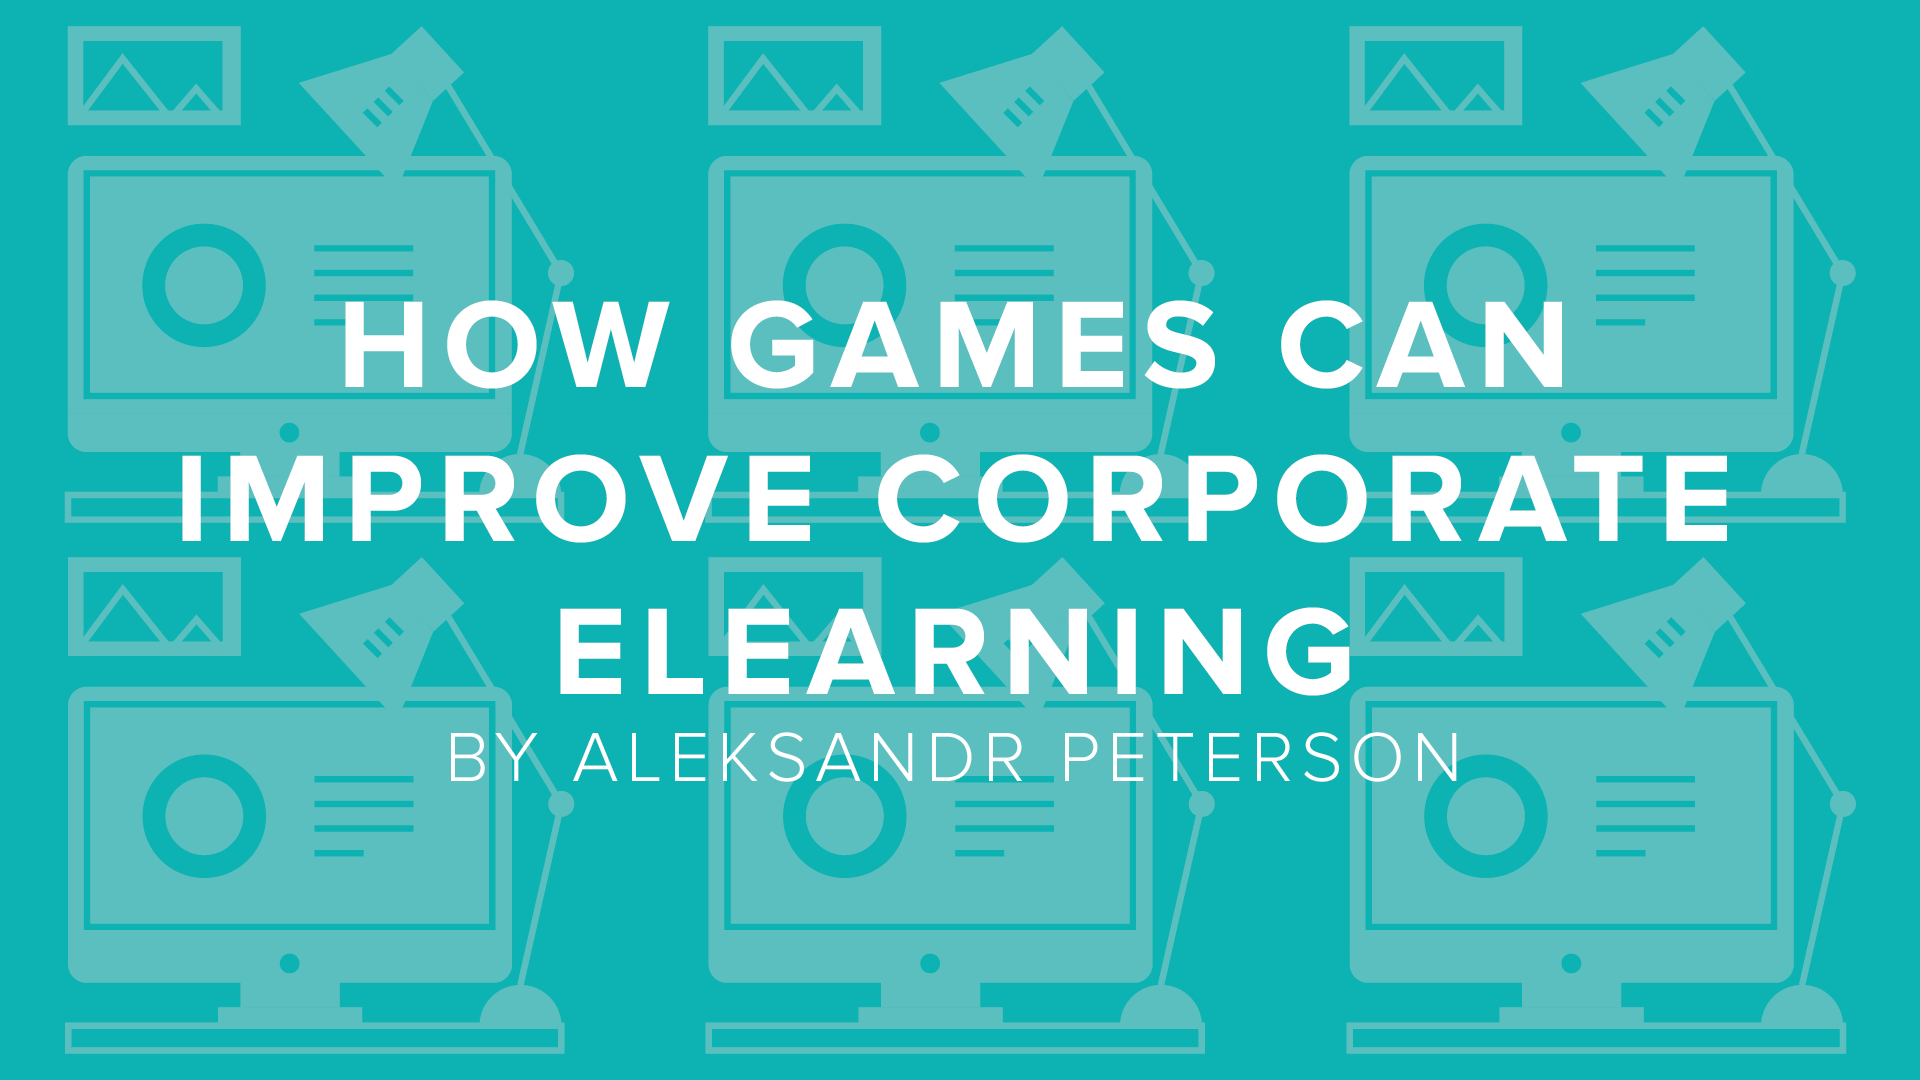 DigitalChalk: How Games Can Improve Corporate eLearning by Aleksandr Peterson